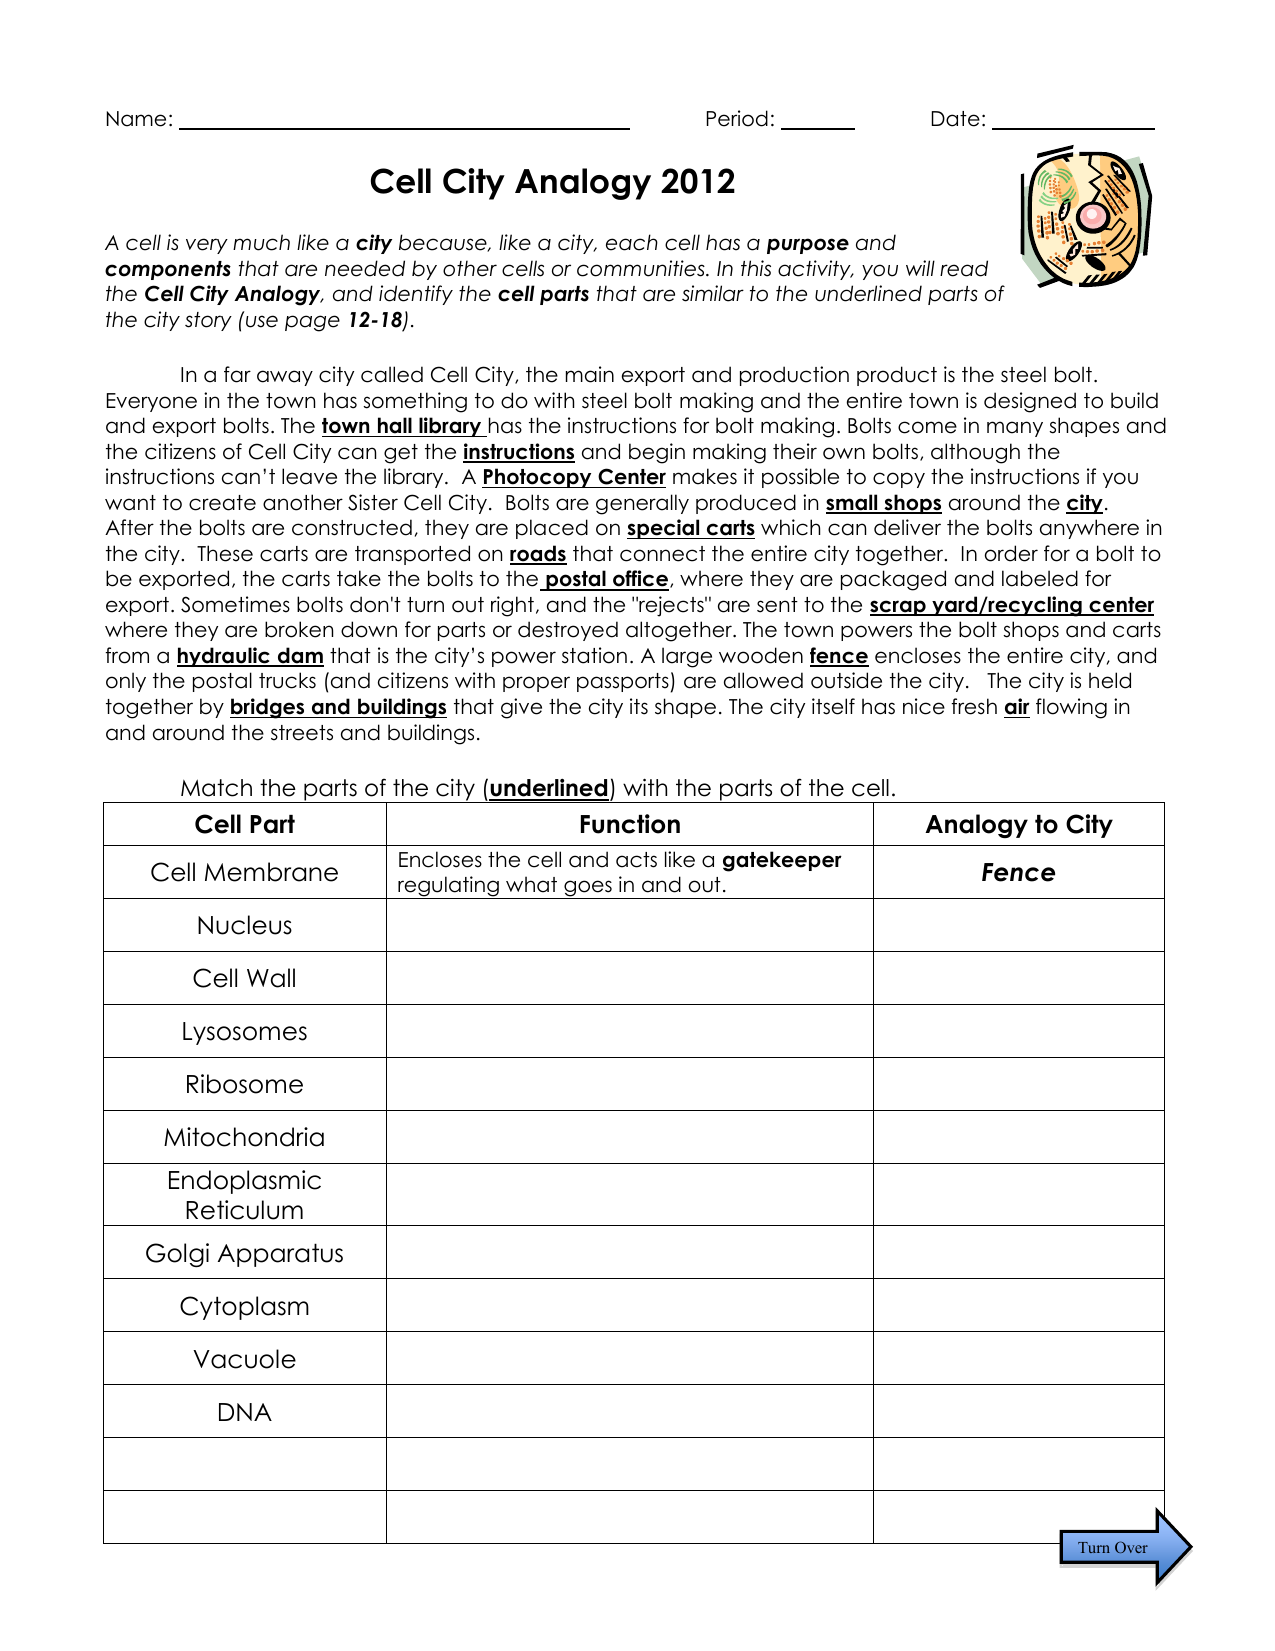 Cell City Analogy - Rochester Community Schools In Cell City Analogy Worksheet Answers